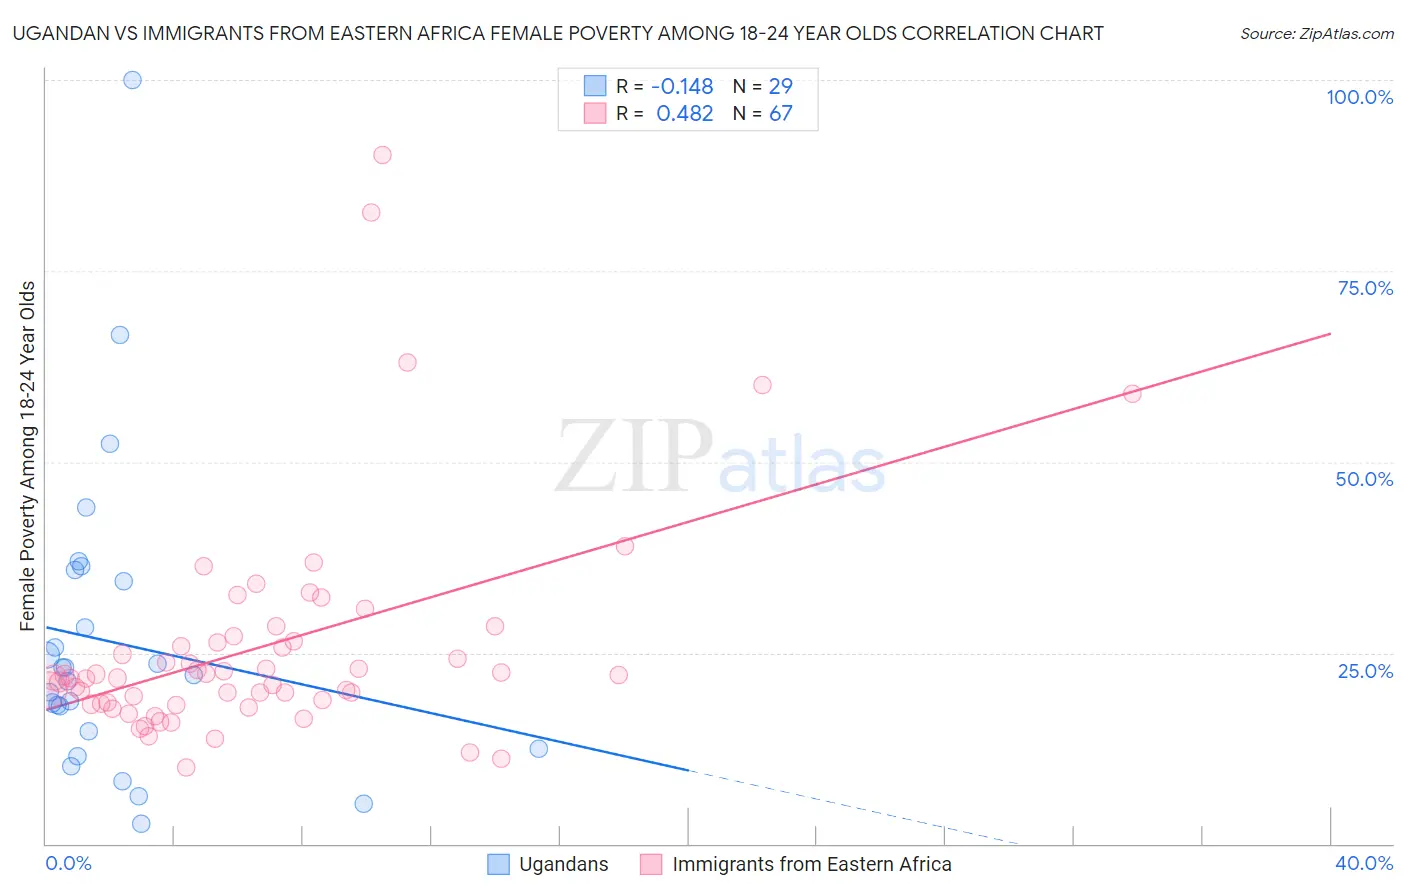 Ugandan vs Immigrants from Eastern Africa Female Poverty Among 18-24 Year Olds